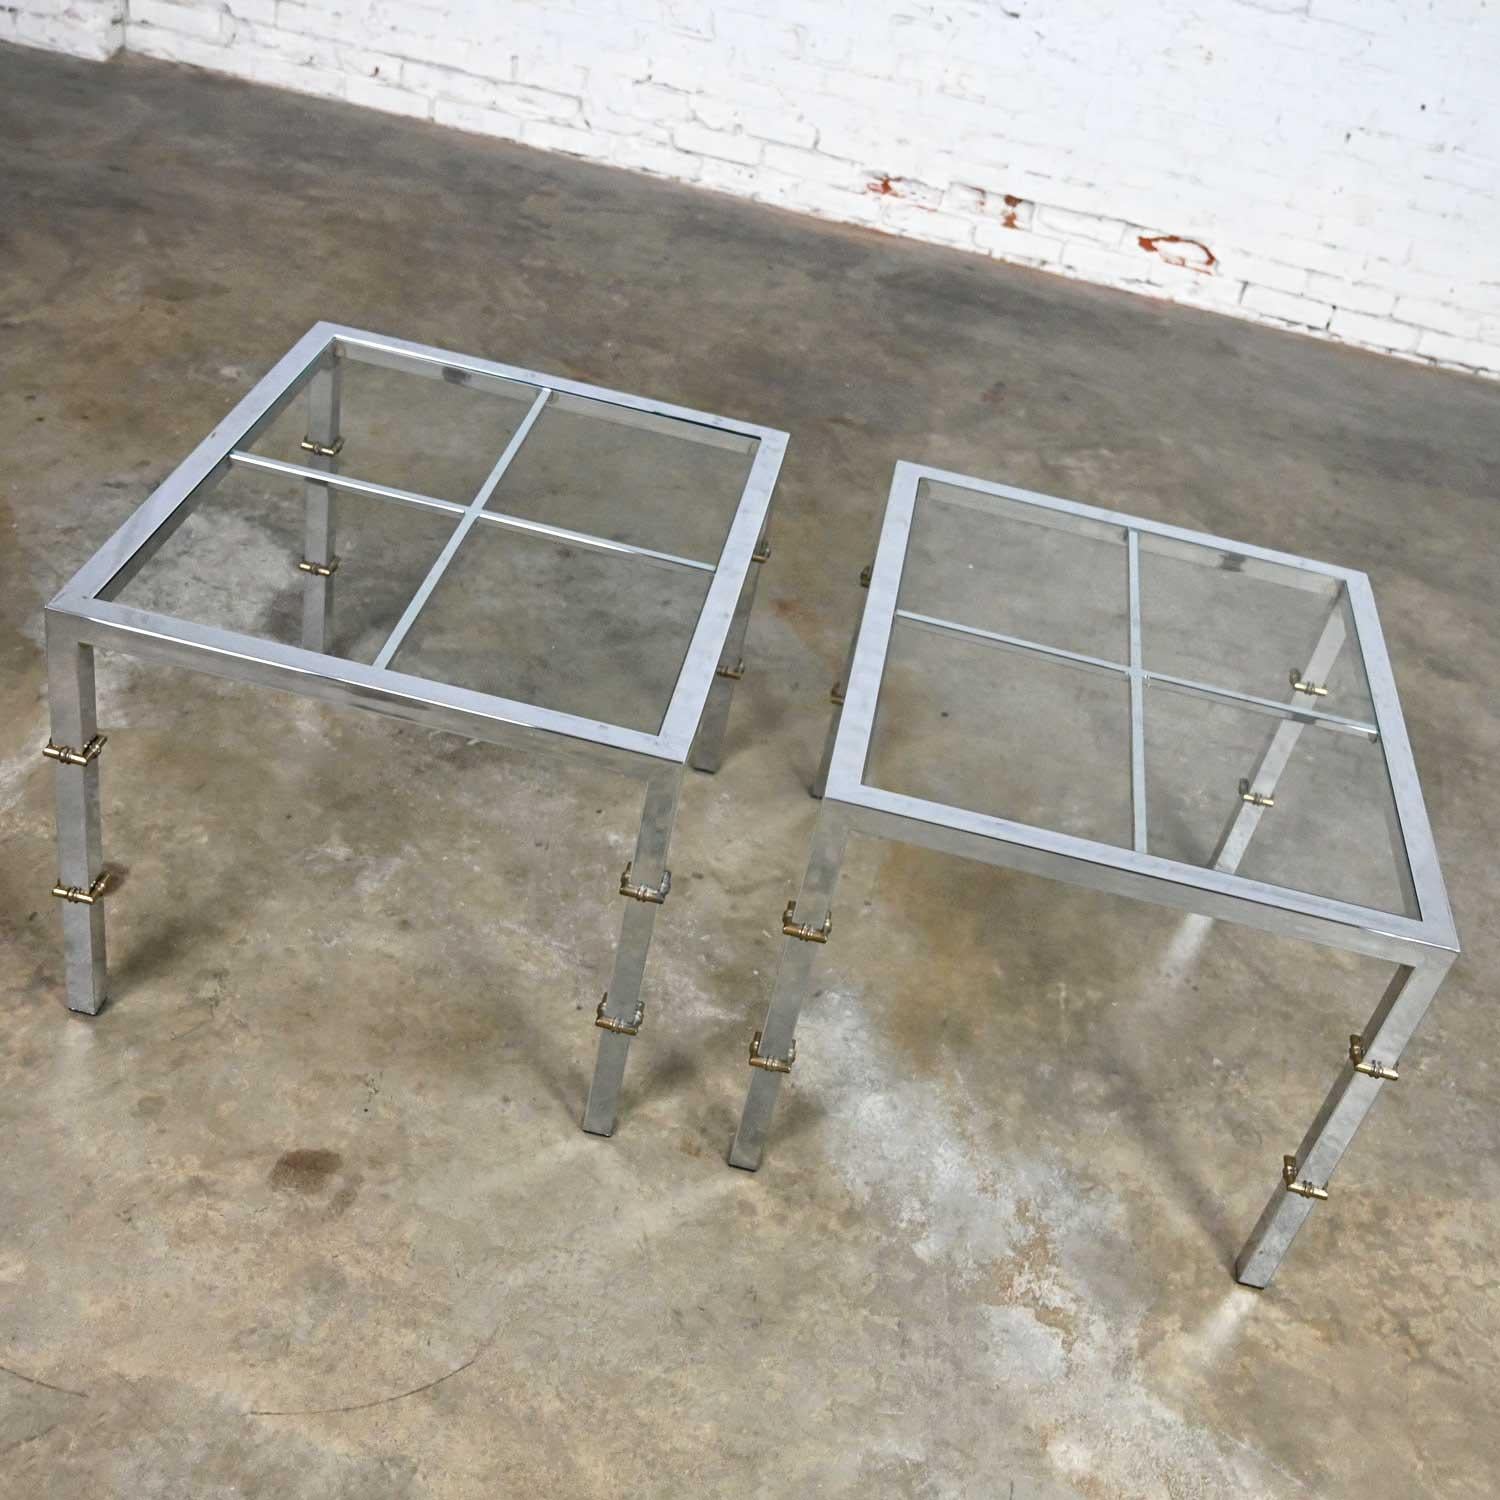 Hollywood Regency Chrome & Glass Square End Tables Brass Details a Pair For Sale 4